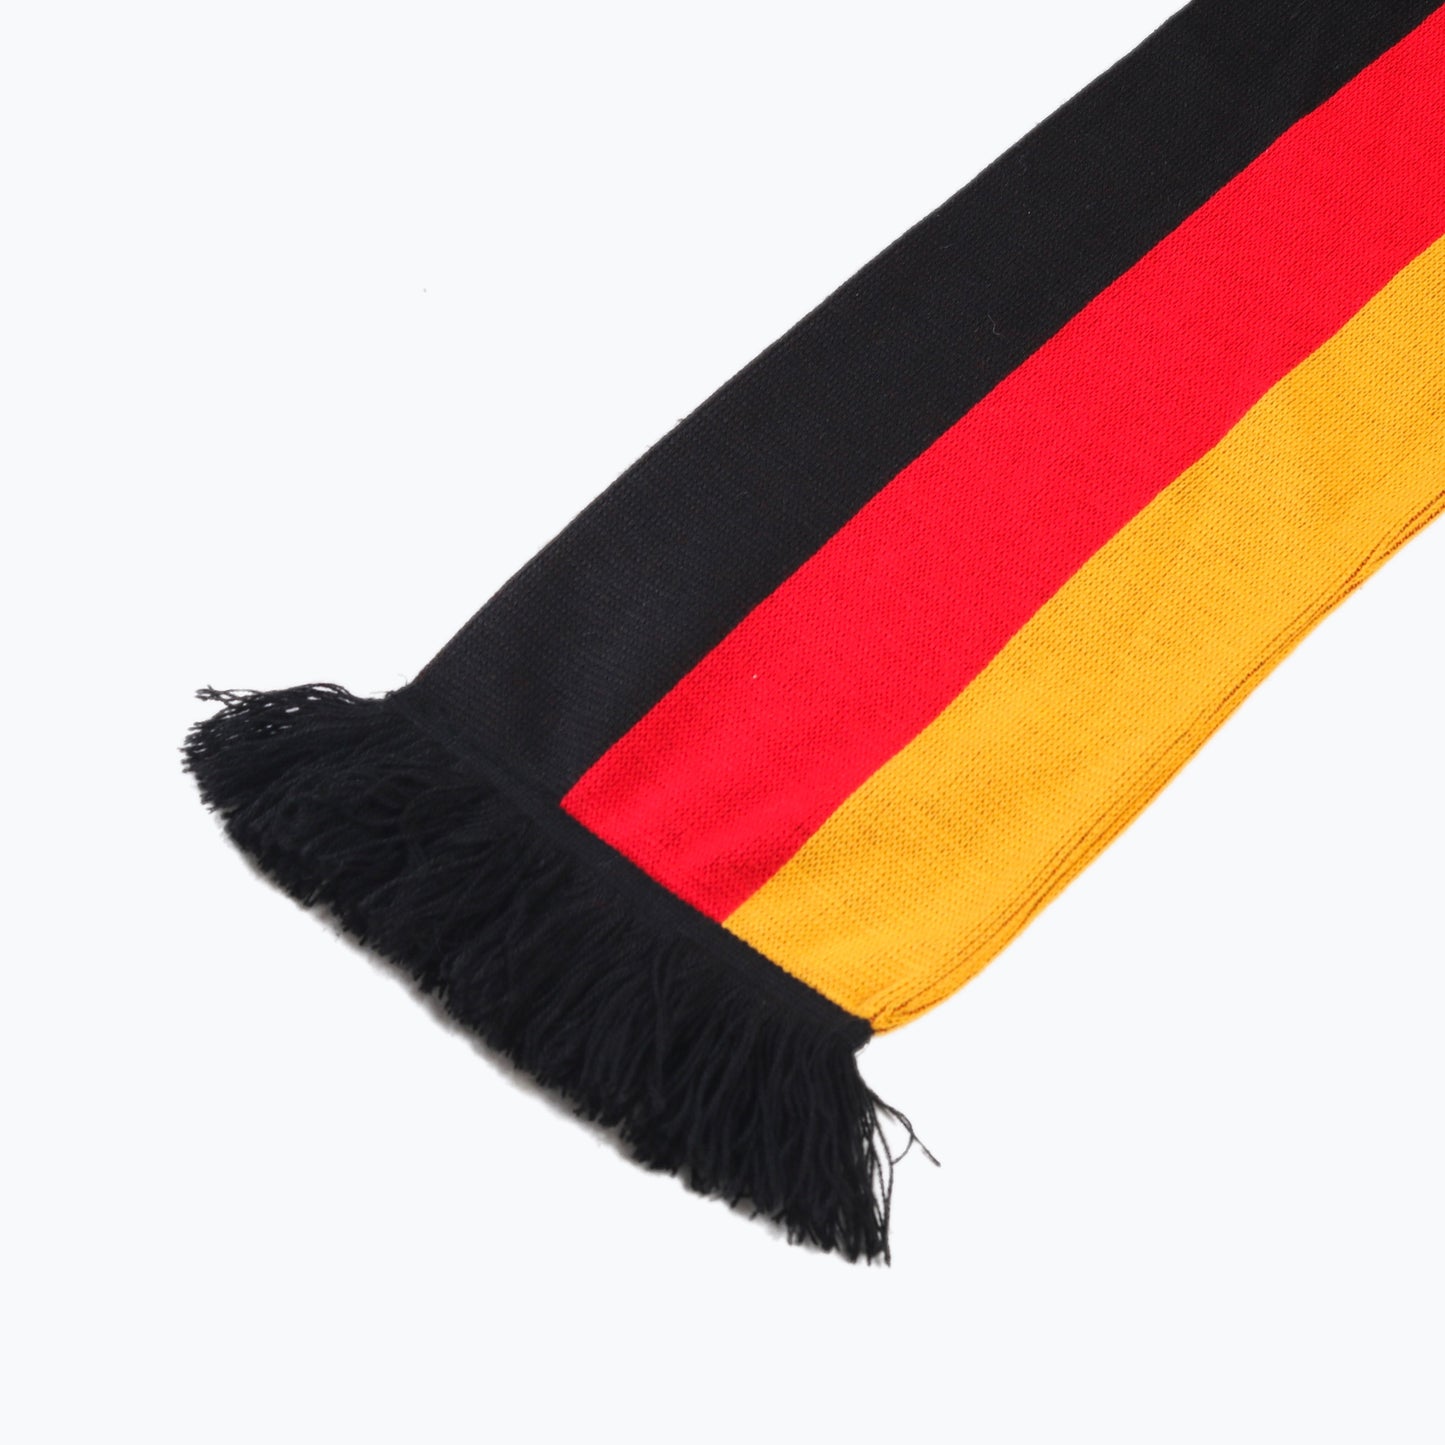 Vintage Germany Scarf - American Madness